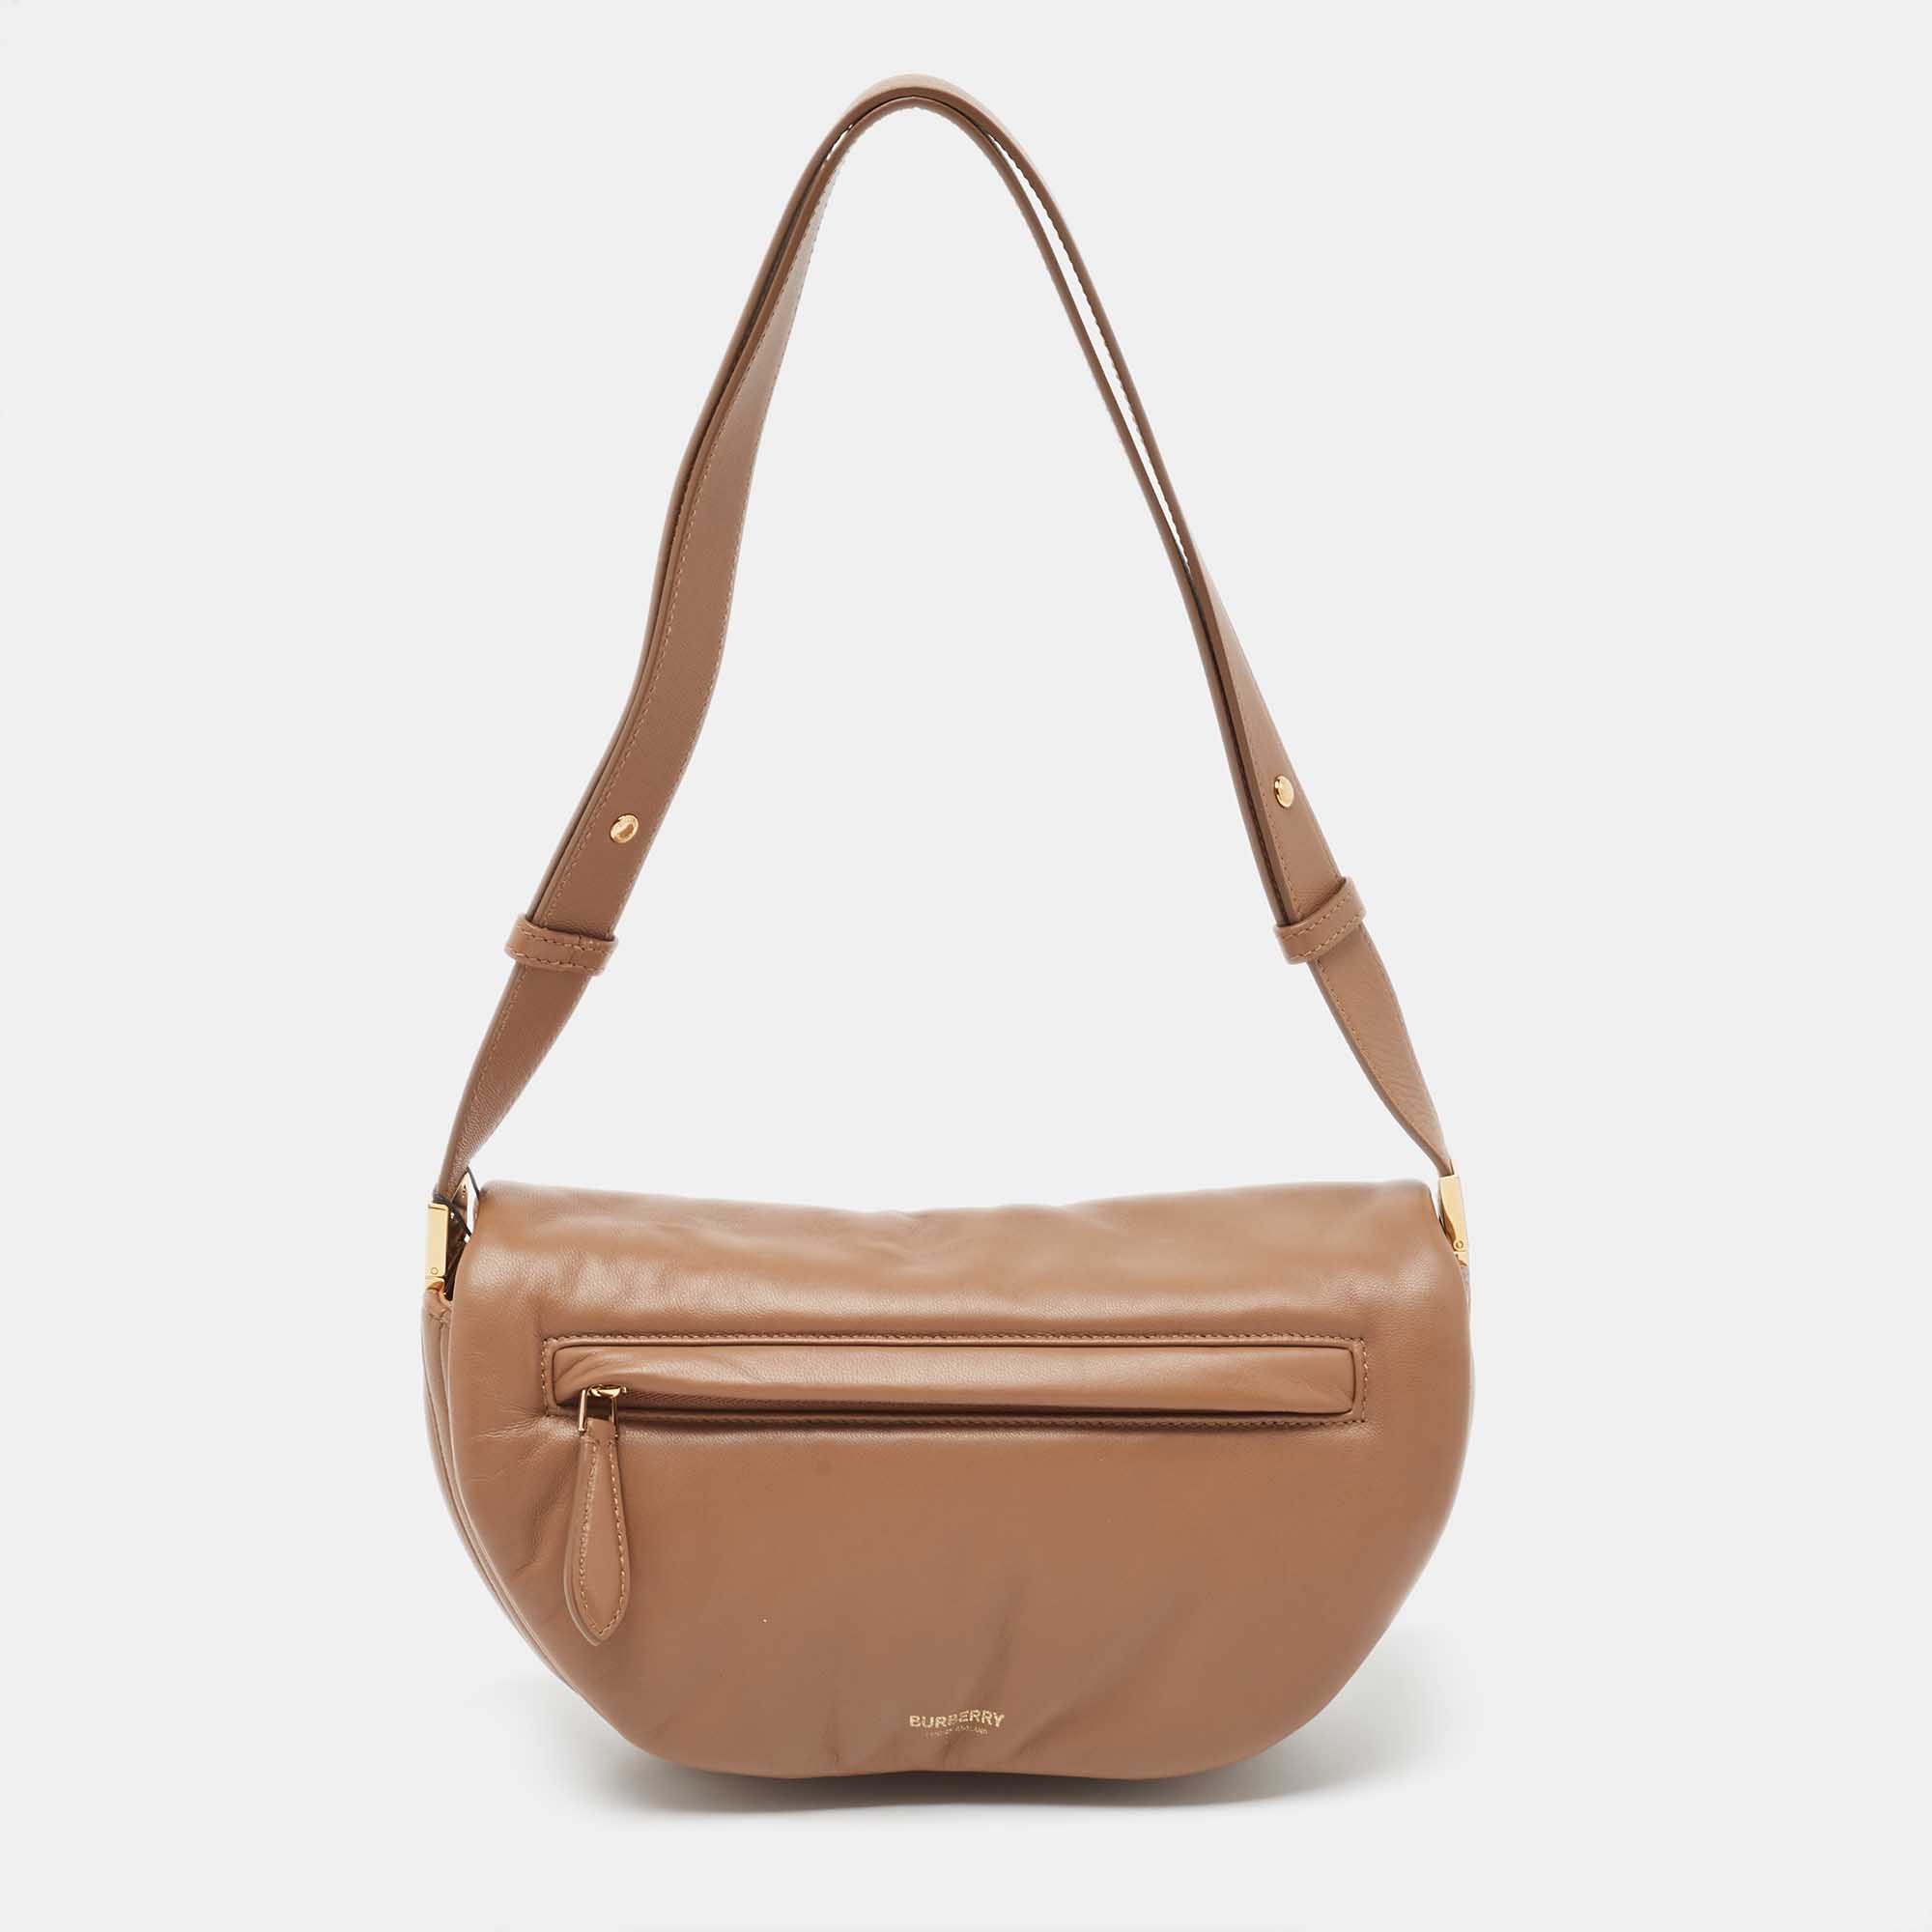 Burberry brown leather small olympia shoulder bag